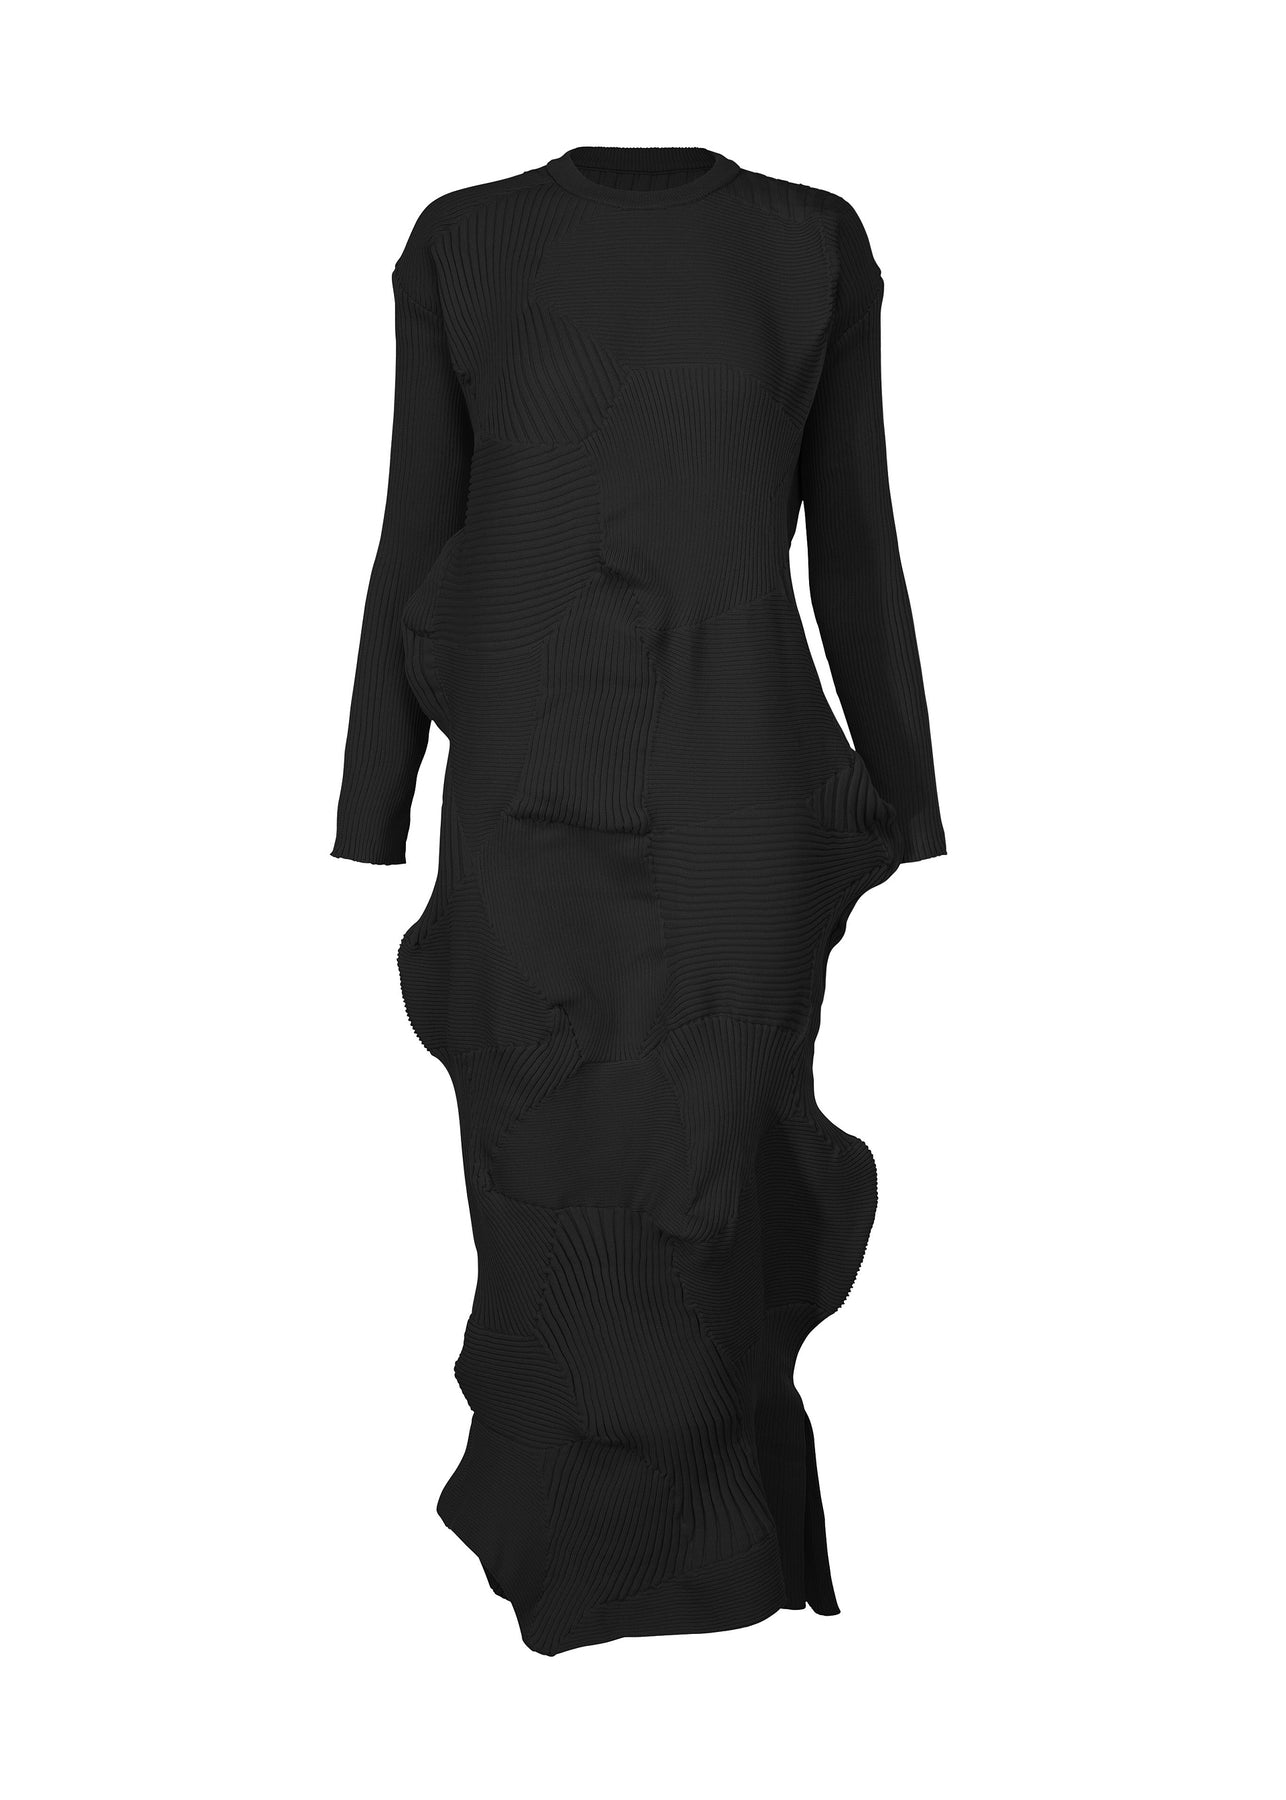 KONE KONE DRESS | The official ISSEY MIYAKE ONLINE STORE | ISSEY